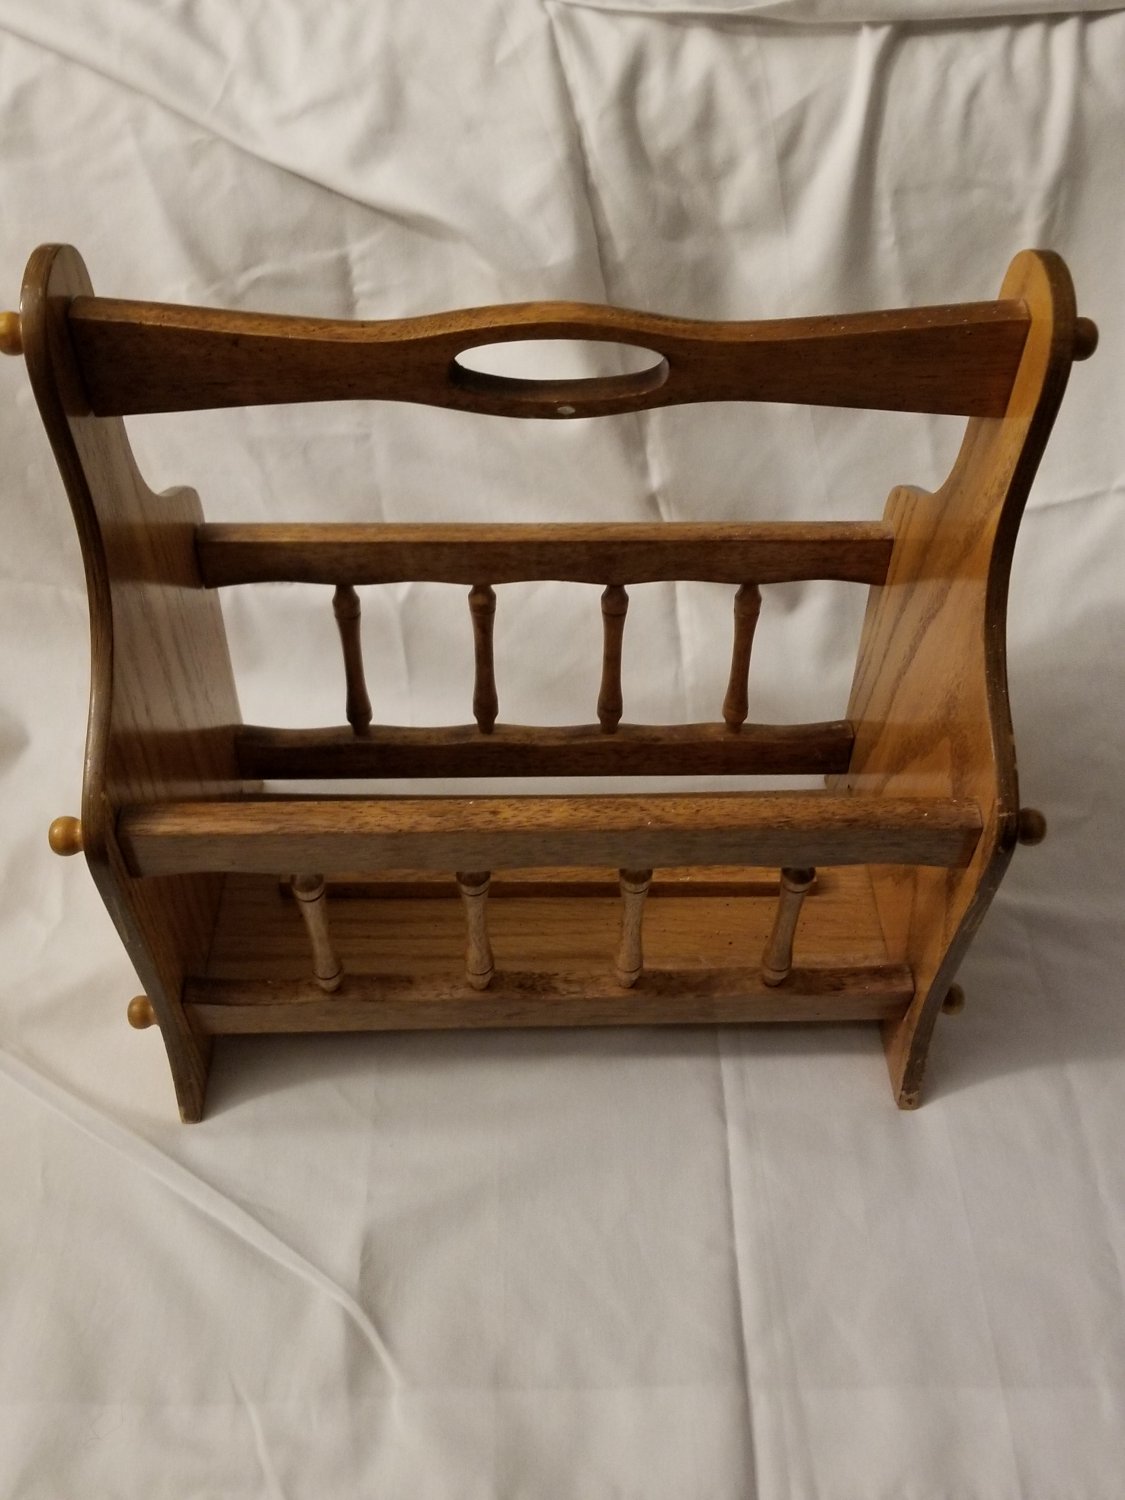 Vintage Wood Magazine Holder /Book Rack The Commodore Collection by Rosalco